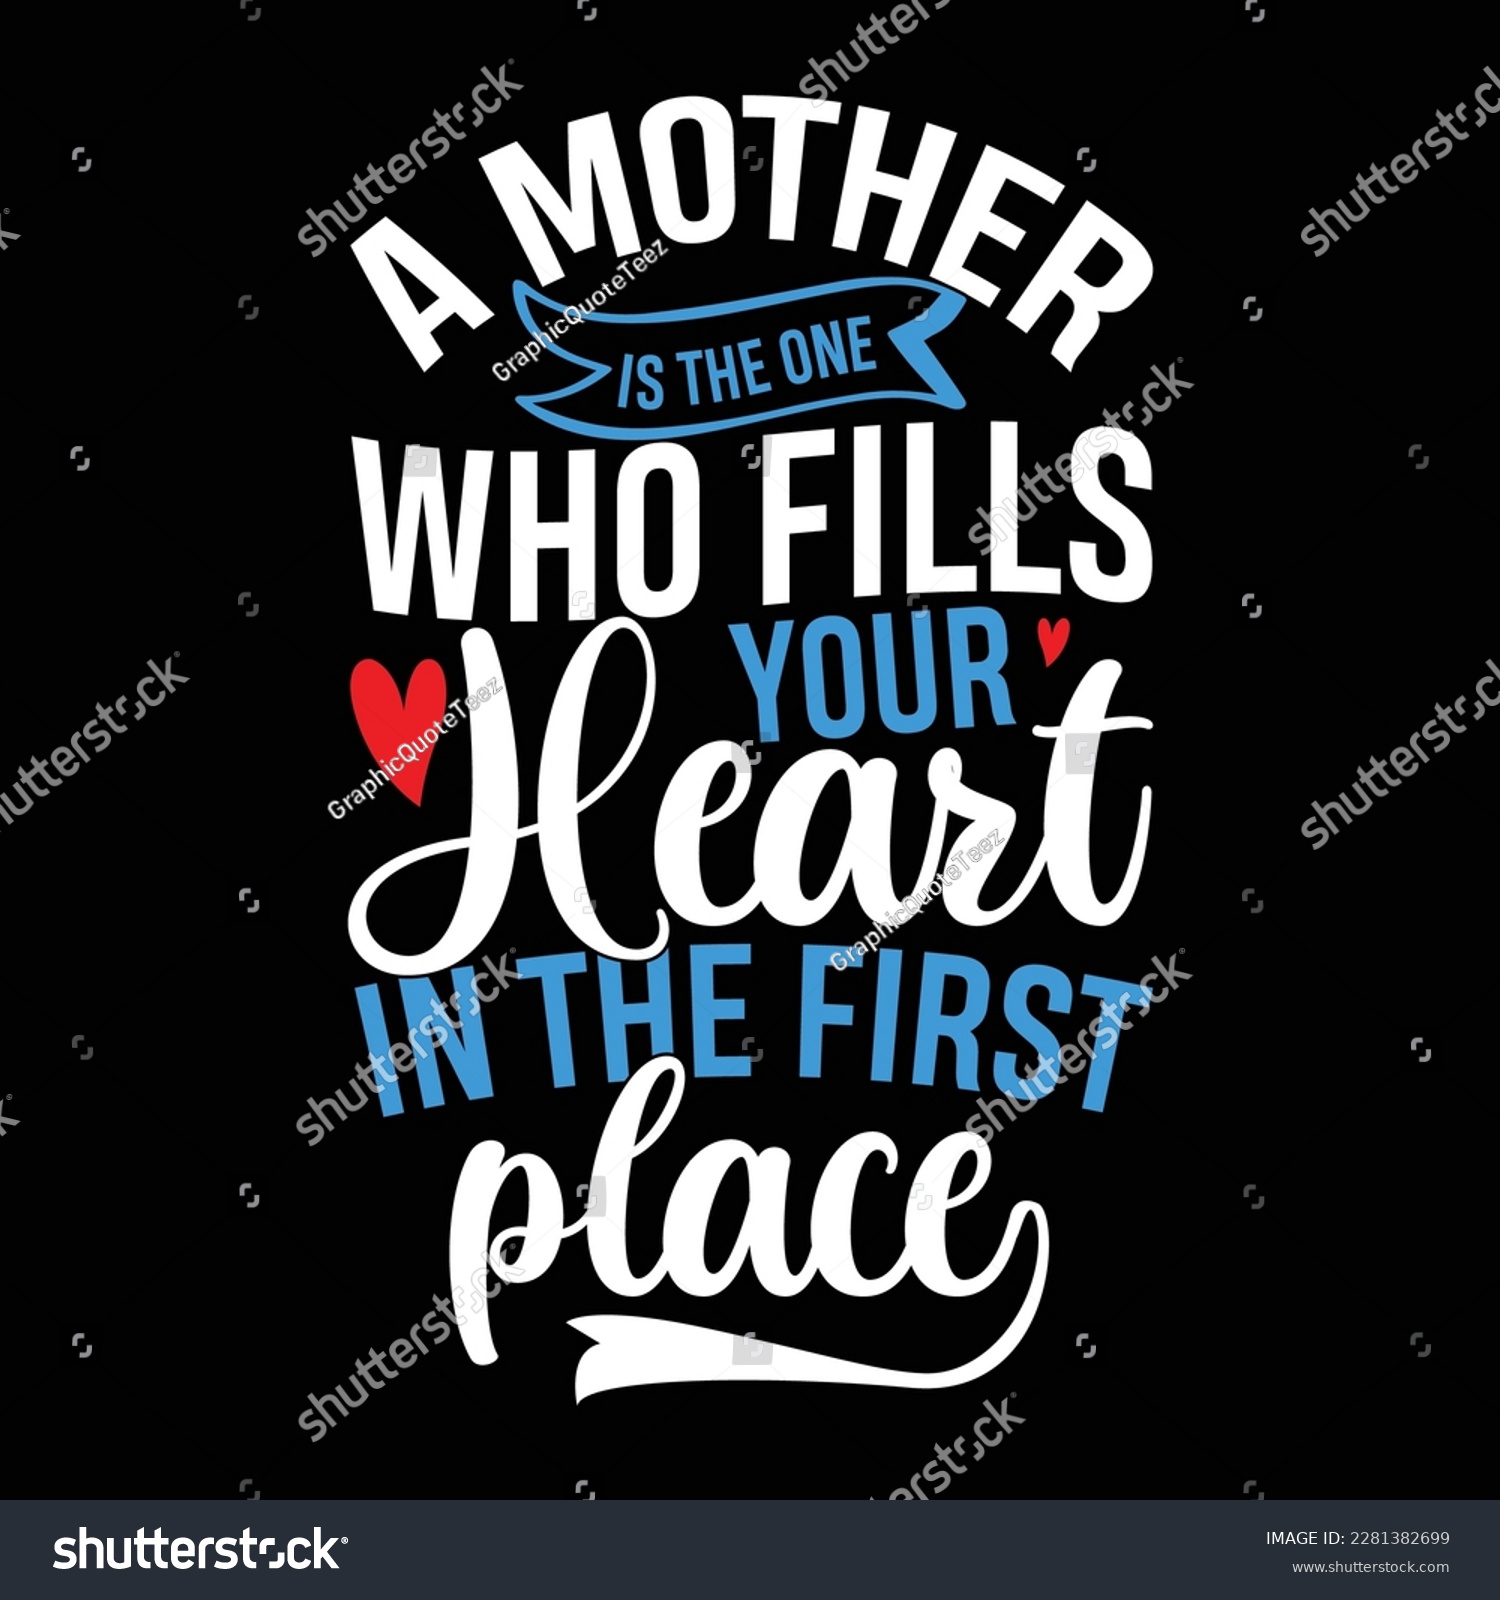 SVG of a mother is the one who fills your heart in the first place, women graphic heart love, happy mothers day design svg